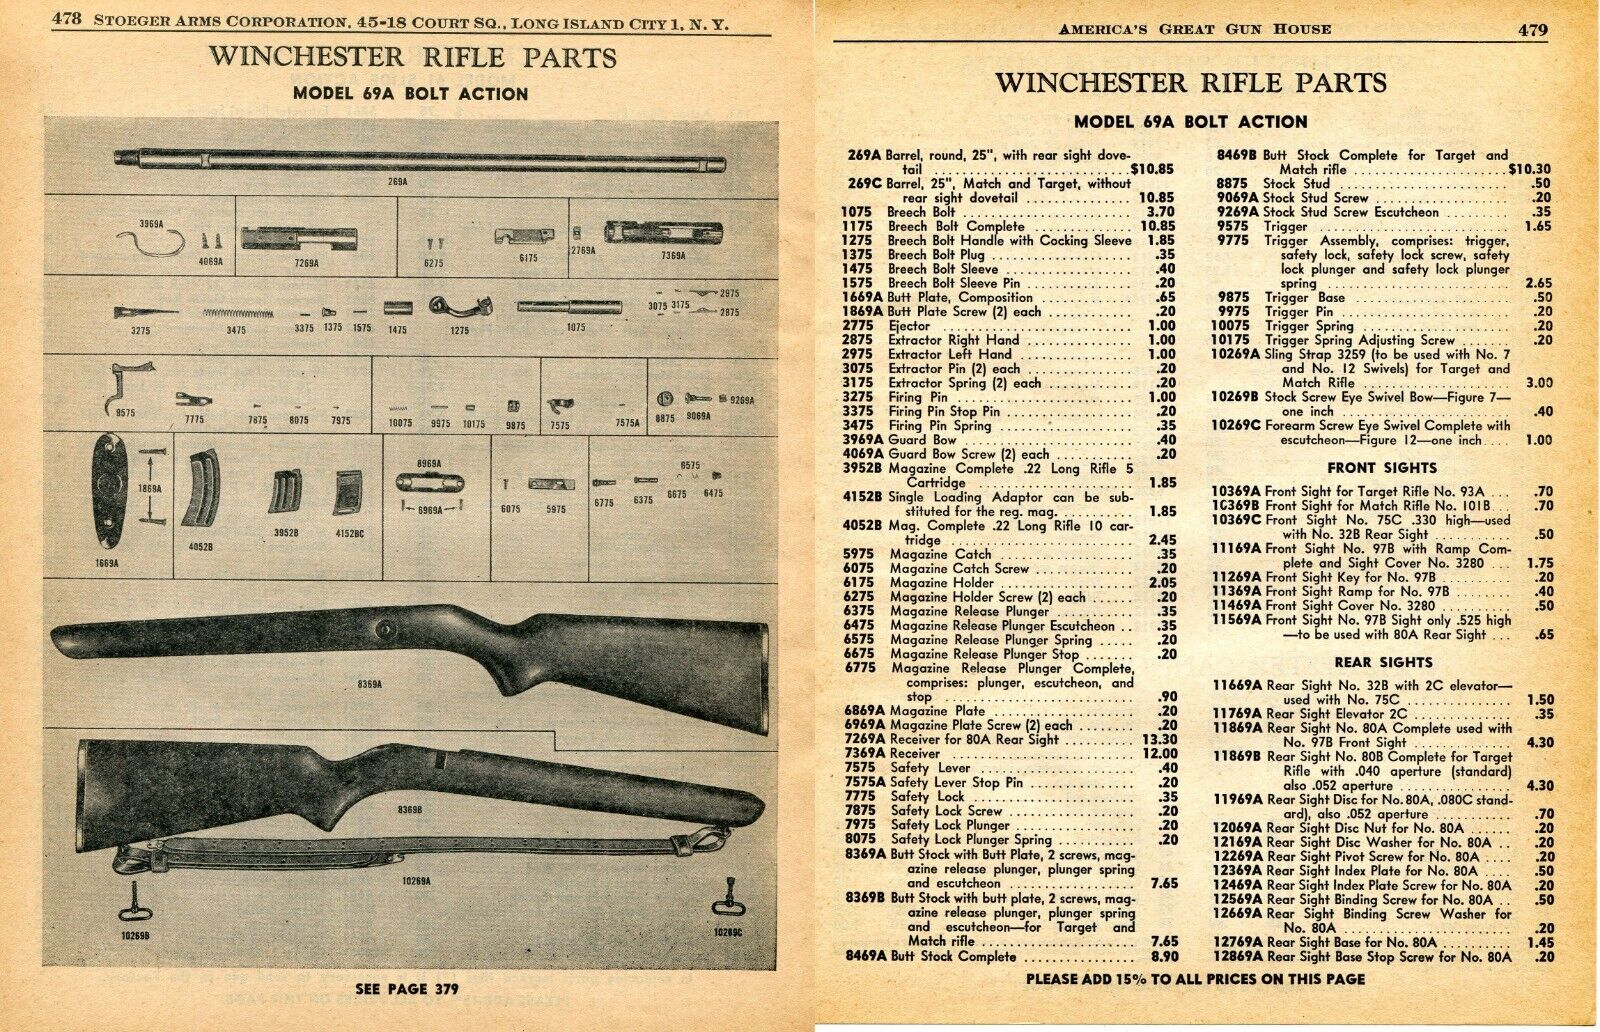 1958 2pg Print Ad of Winchester Model 69A Bolt Action Rifle Parts List